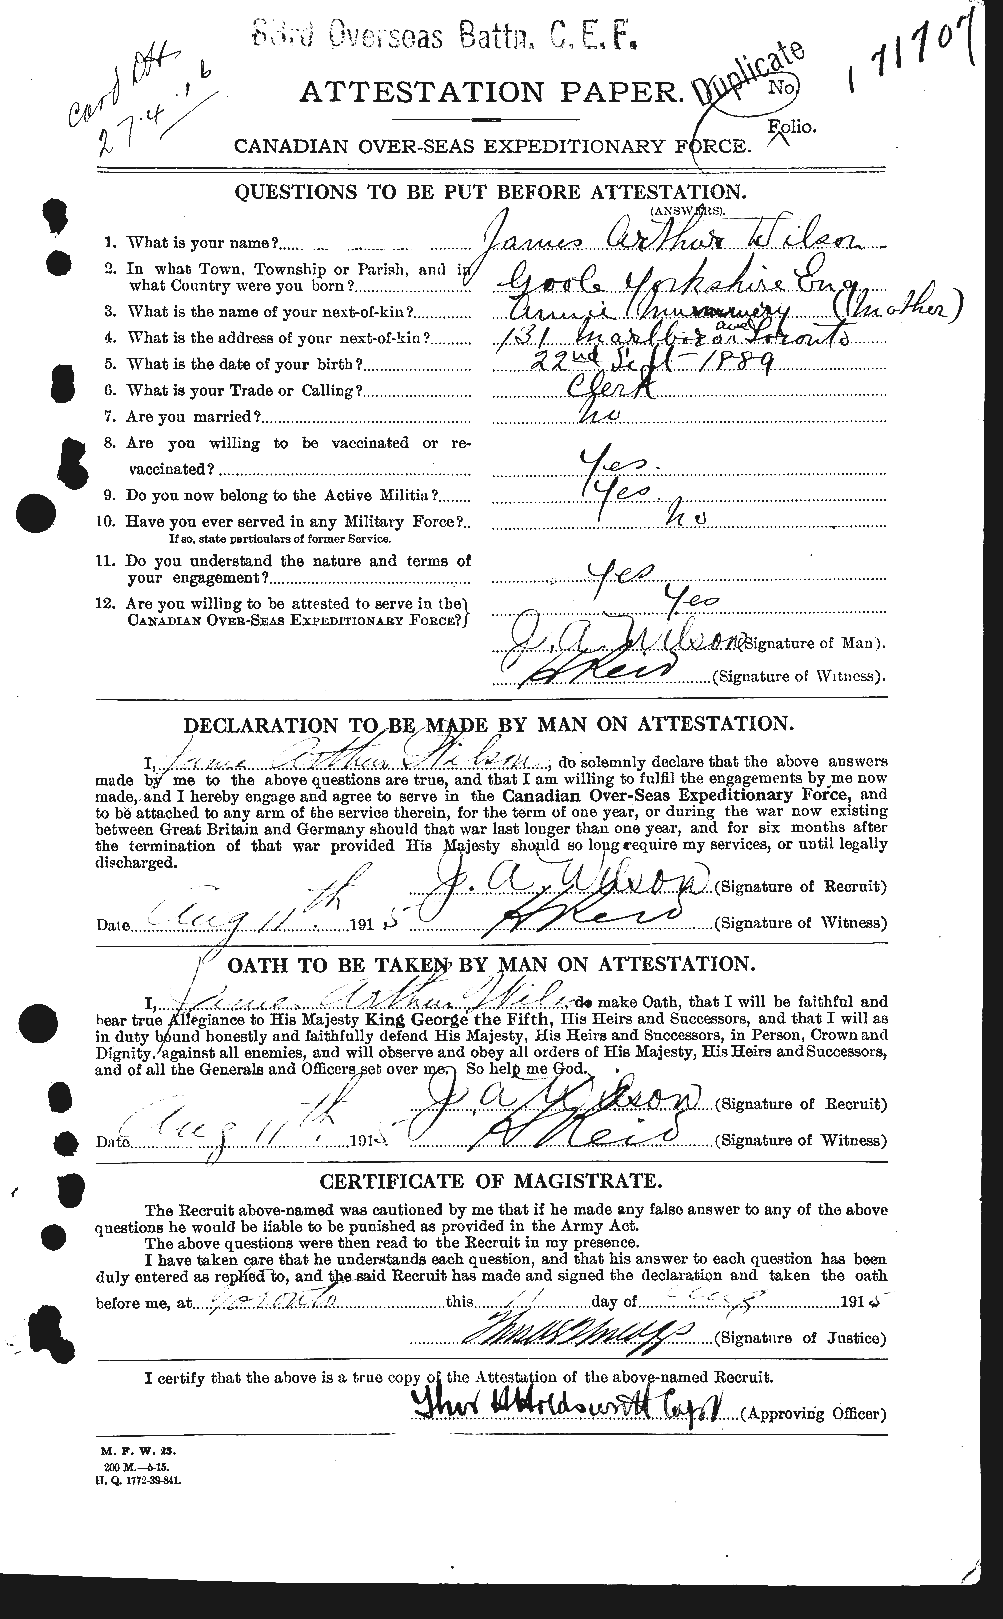 Personnel Records of the First World War - CEF 681421a